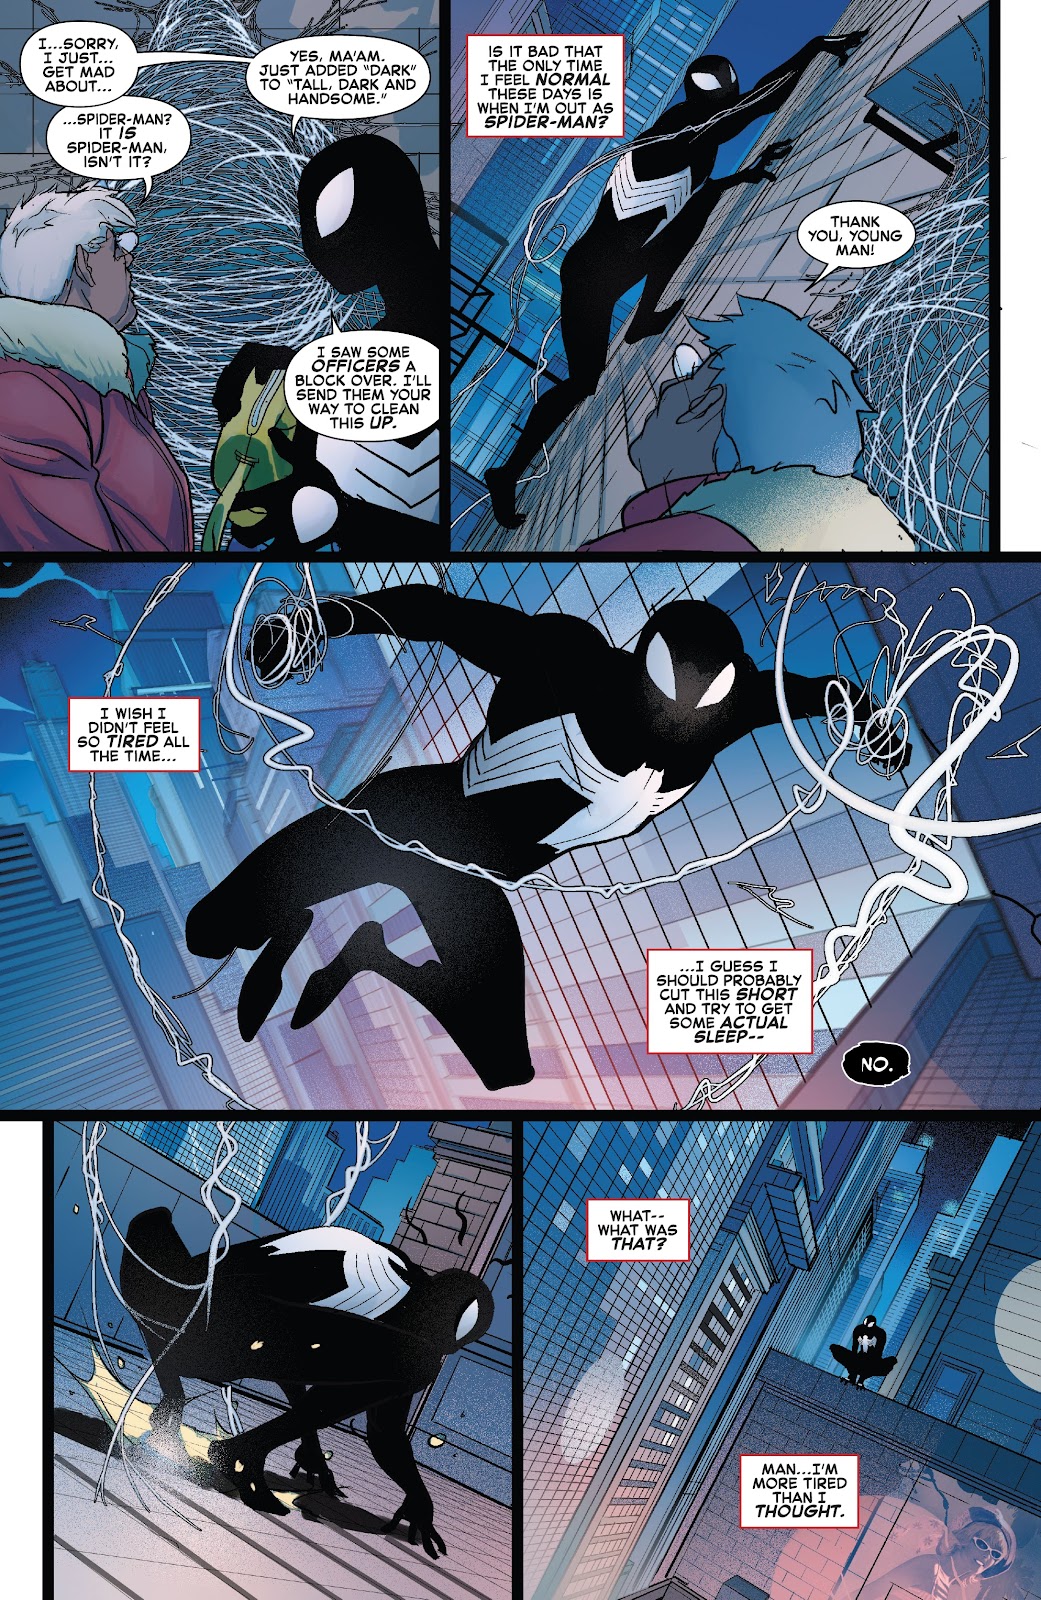 Spider-Man: The Spider's Shadow issue 1 - Page 8